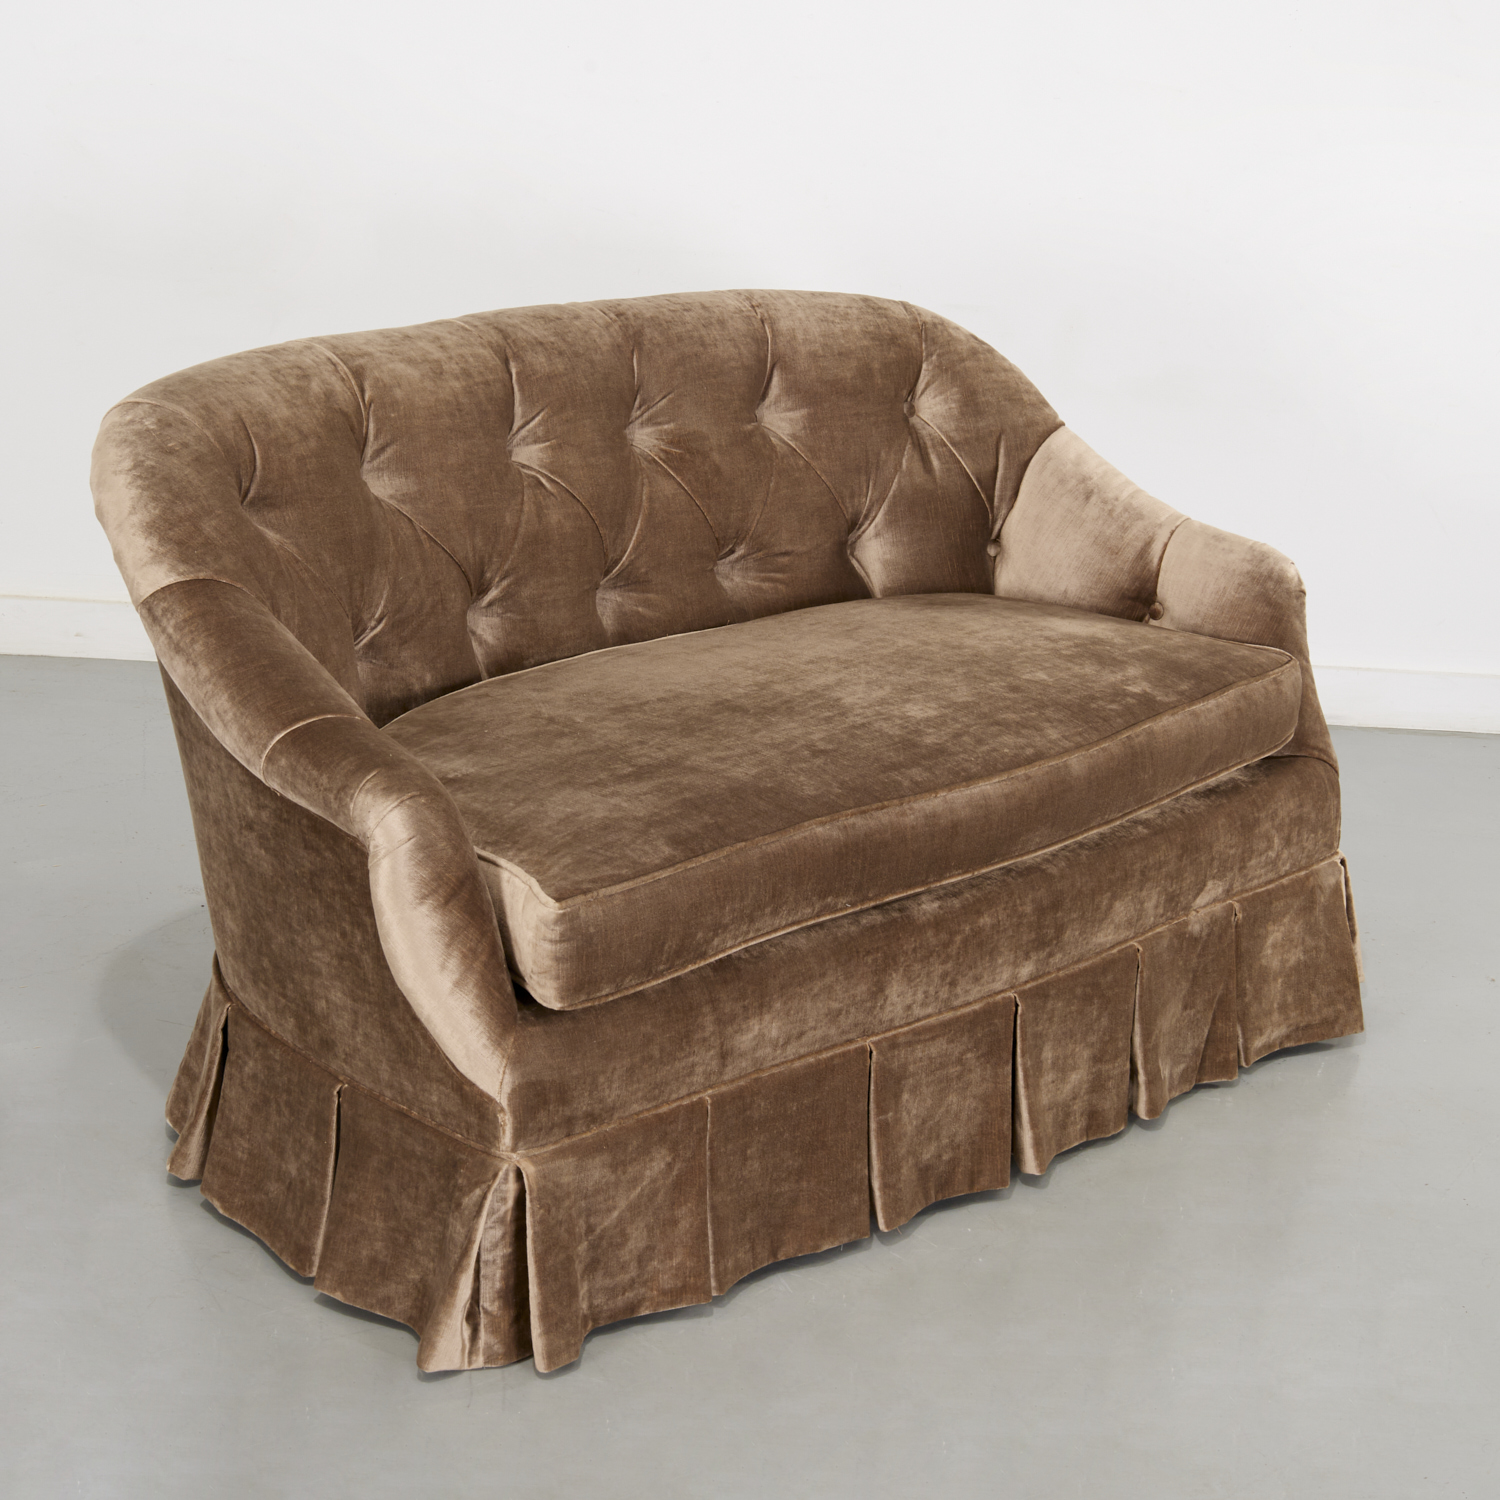 CONTEMPORARY CUSTOM UPHOLSTERED 2fc3ab